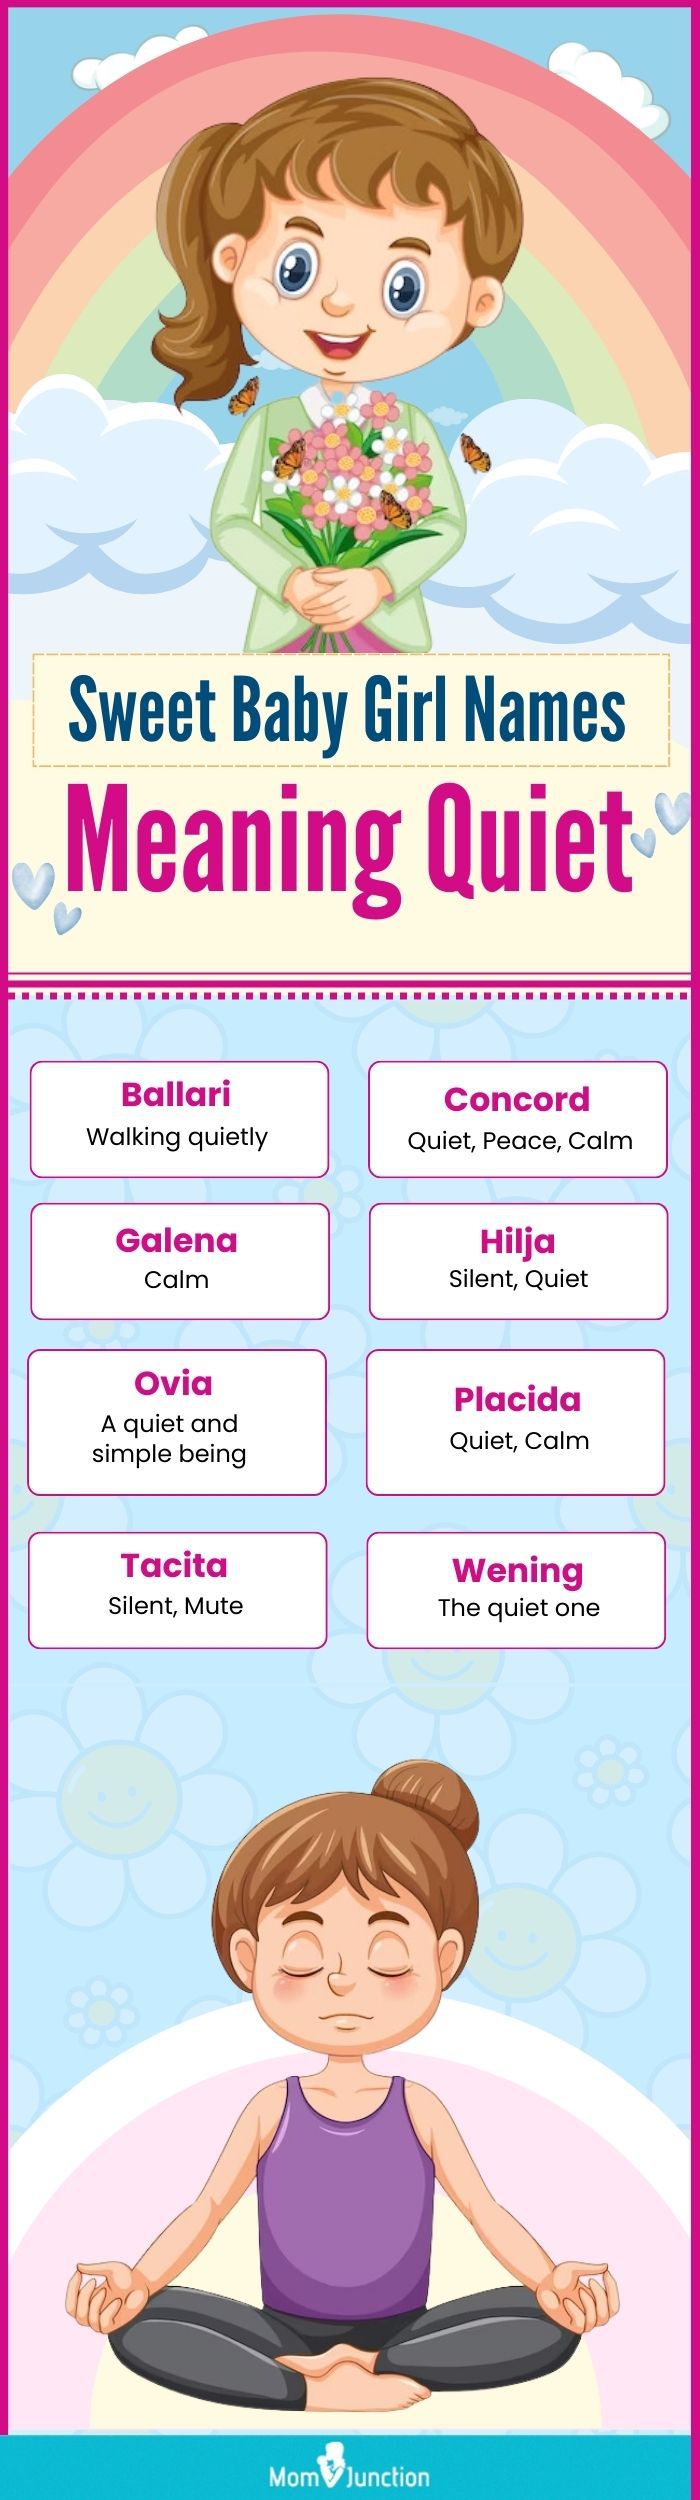 sweet baby girl names meaning quiet (infographic)